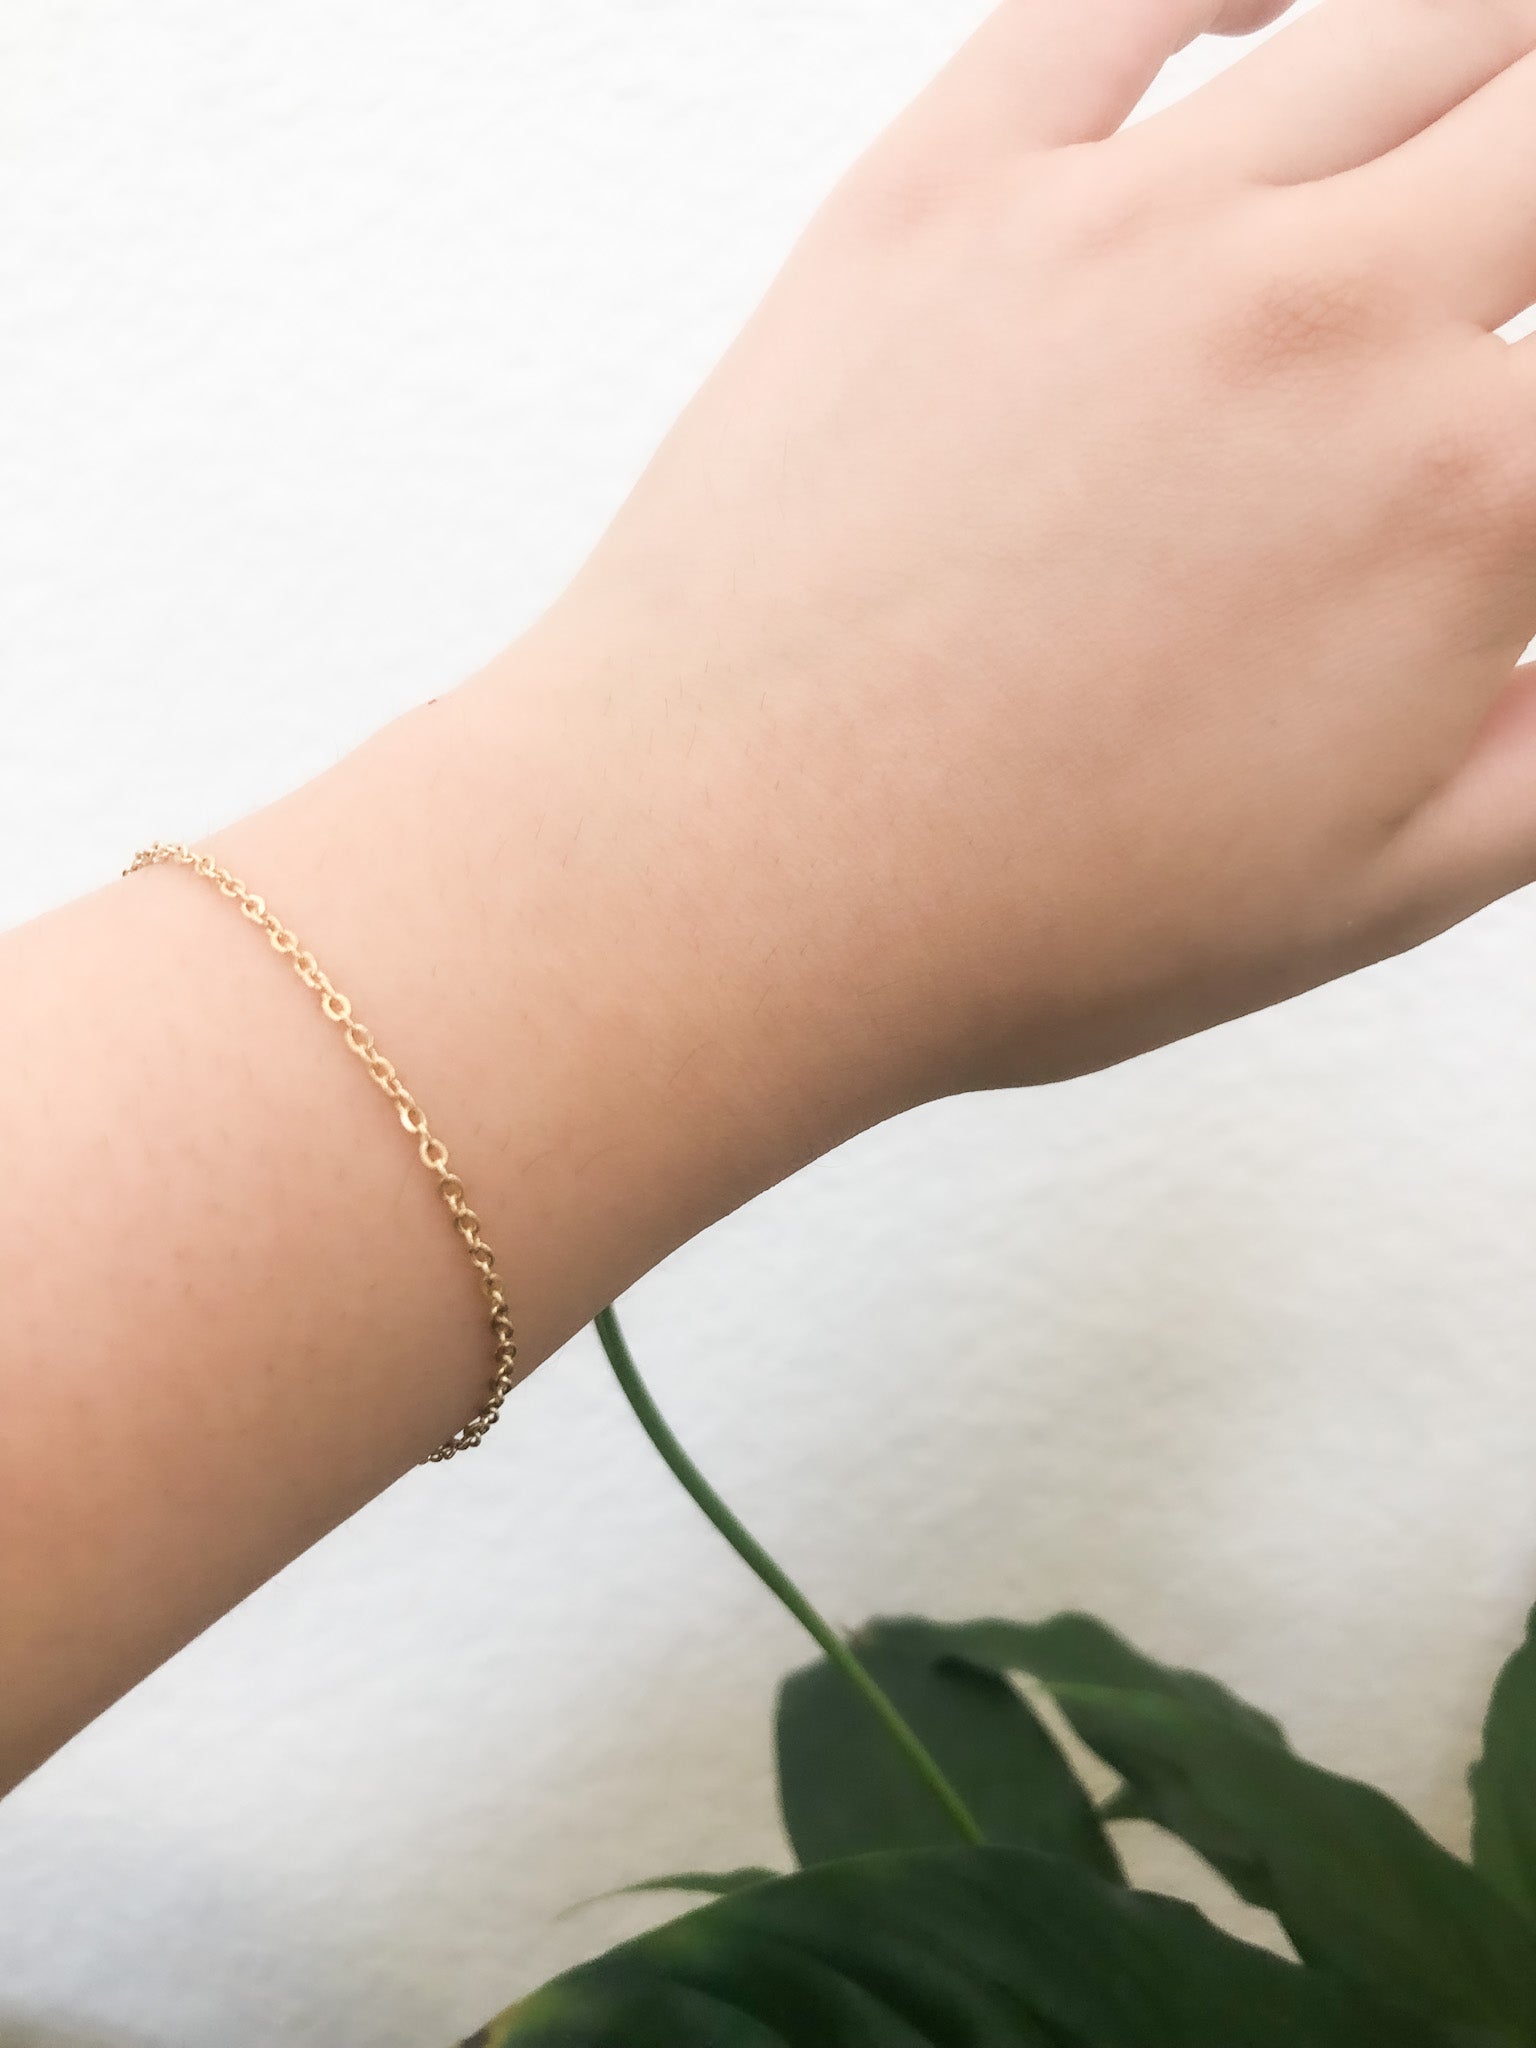 Elevate your jewelry game with our dainty gold bracelet, a versatile and stylish accessory perfect for any occasion. The bracelet features a delicate gold-tone chain with a small gold charm, measuring approximately 0.5 inches in length. The dainty chain measures approximately 7 inches in length, making it the perfect length for layering or wearing on its own. The timeless gold-tone finish adds a touch of elegance to any outfit and is suitable for both casual and formal occasions. 